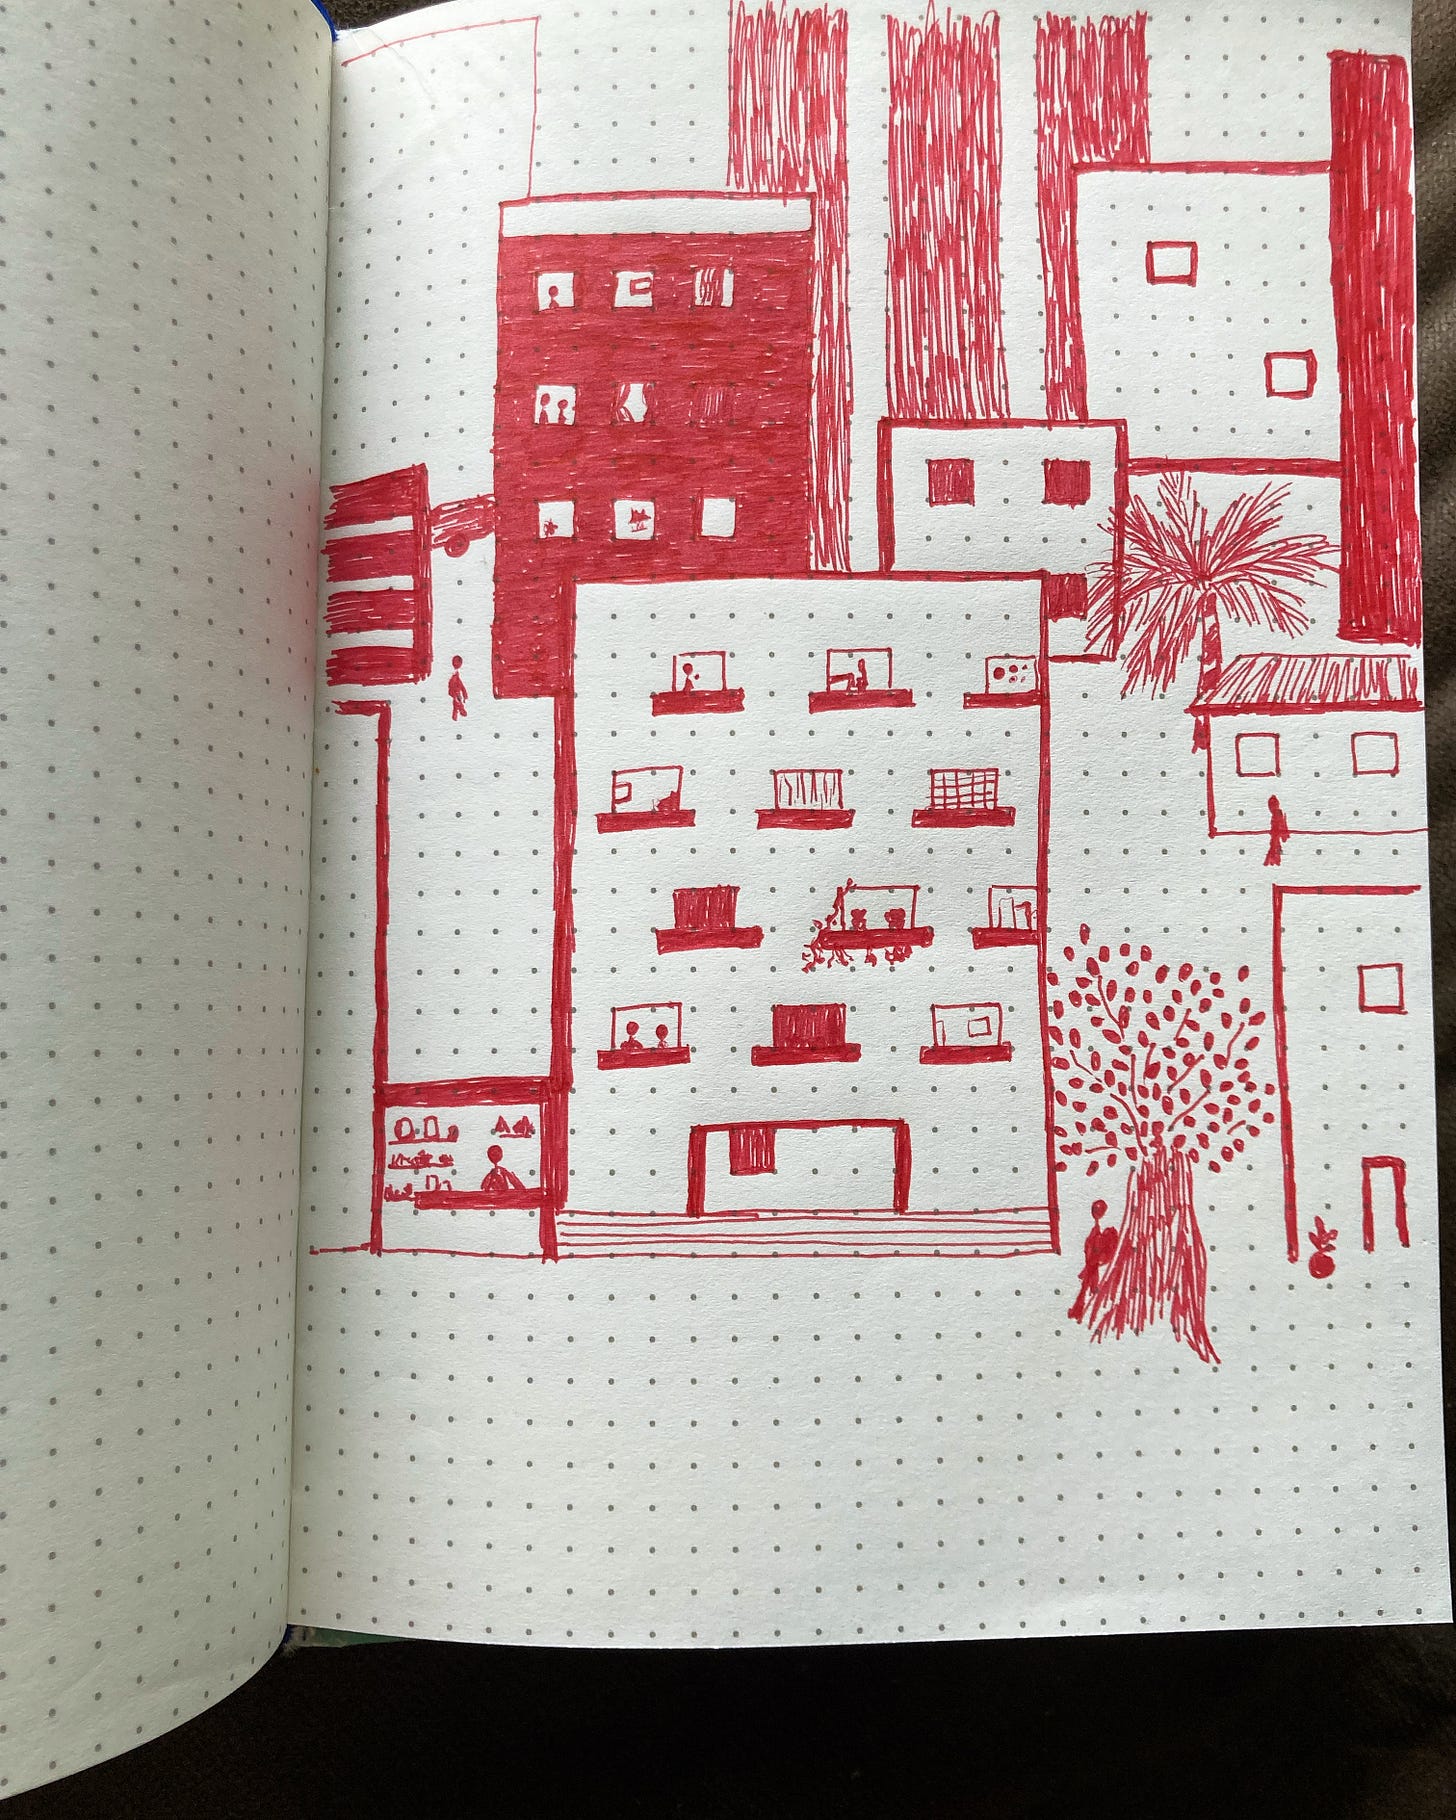 a sketch of buildings with lit windows, done entirely in red ink